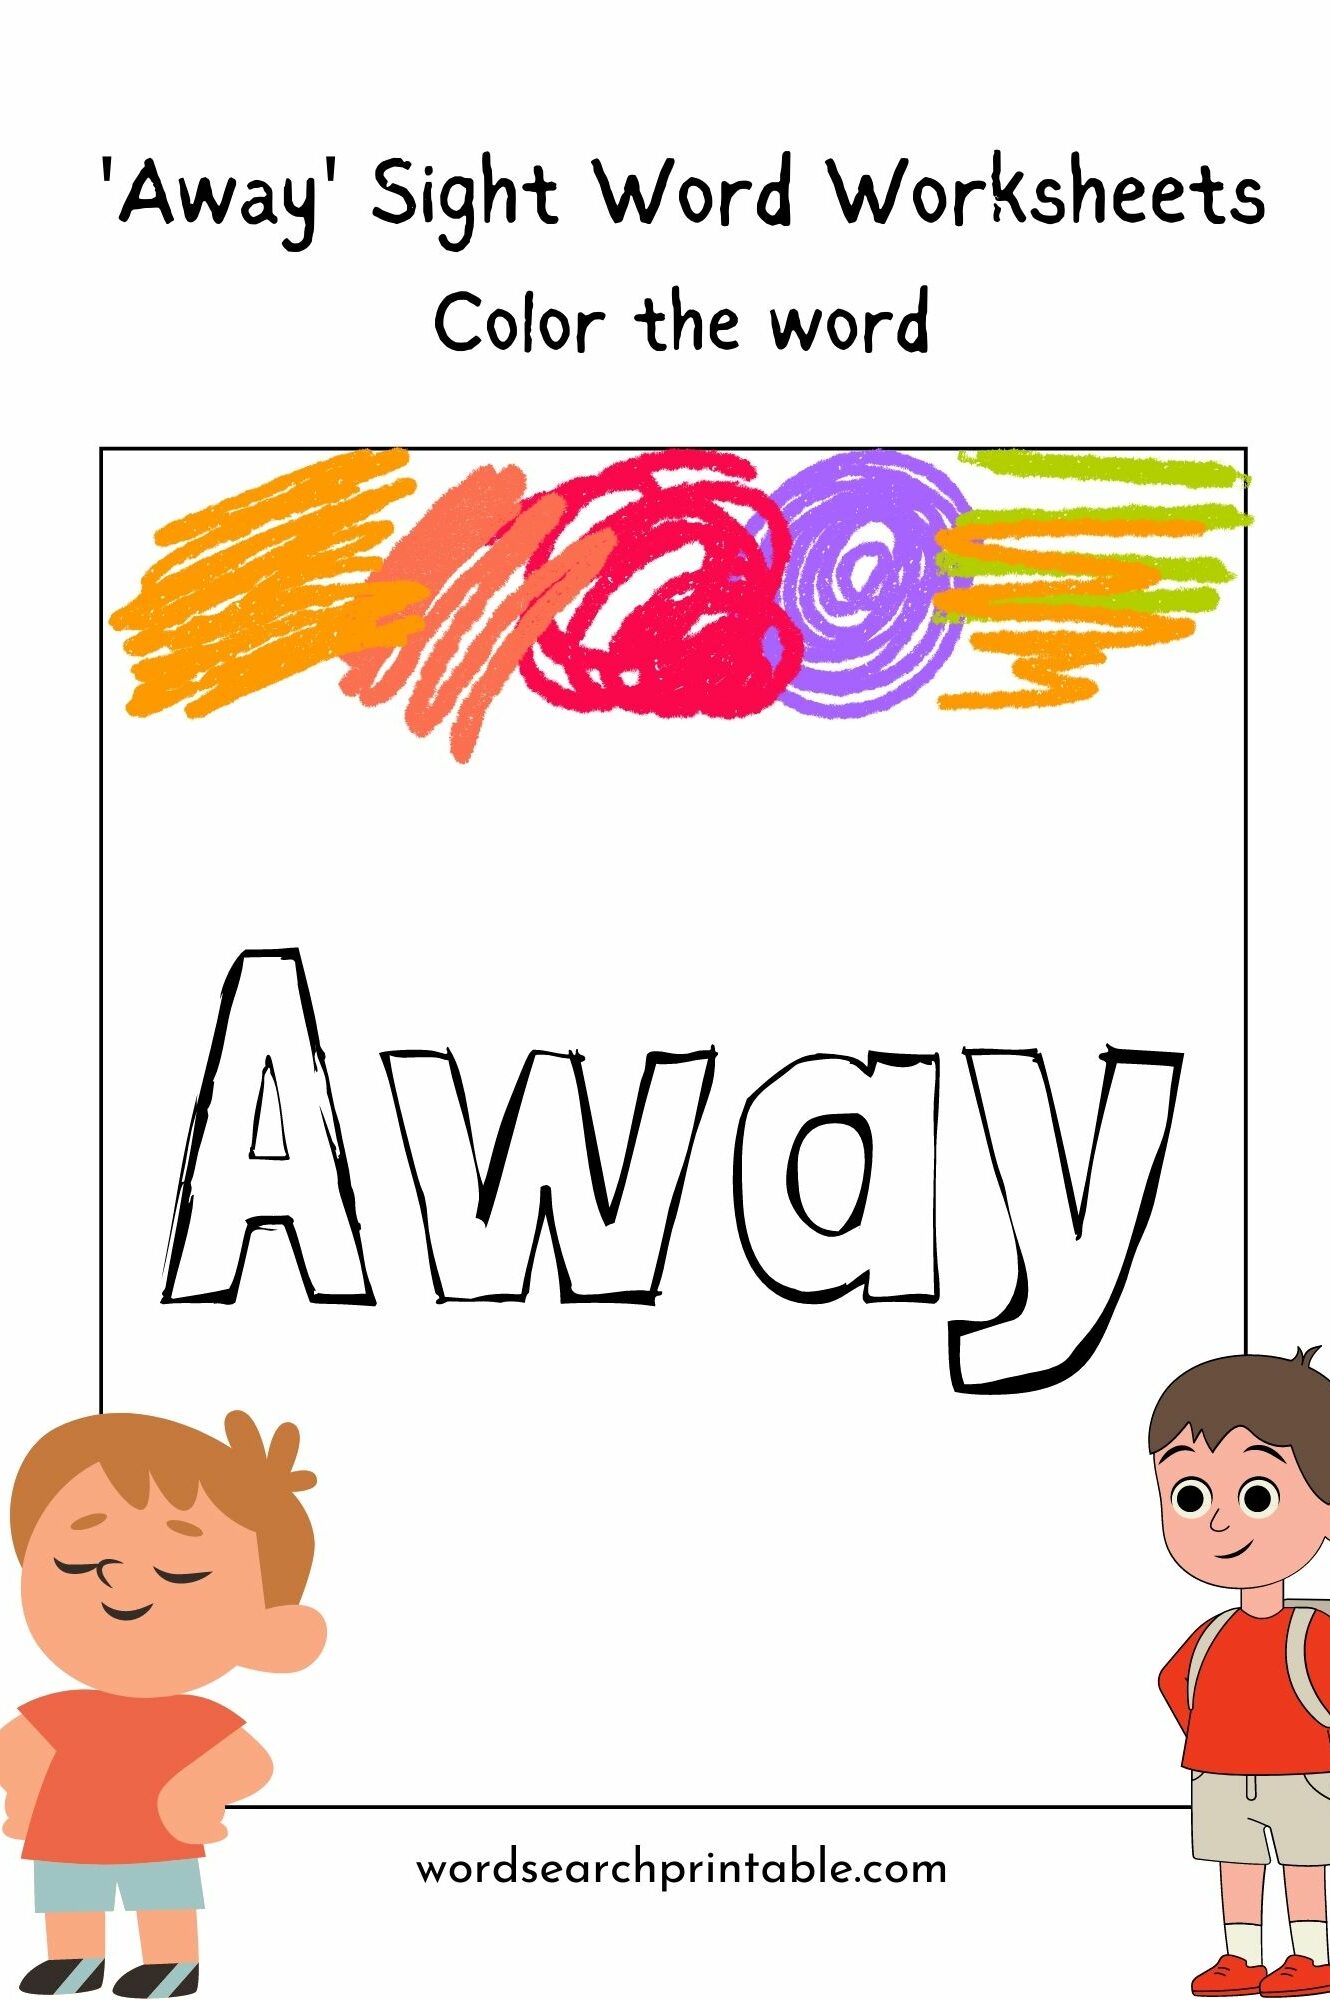 Color the Word “Away” - away sight word worksheets